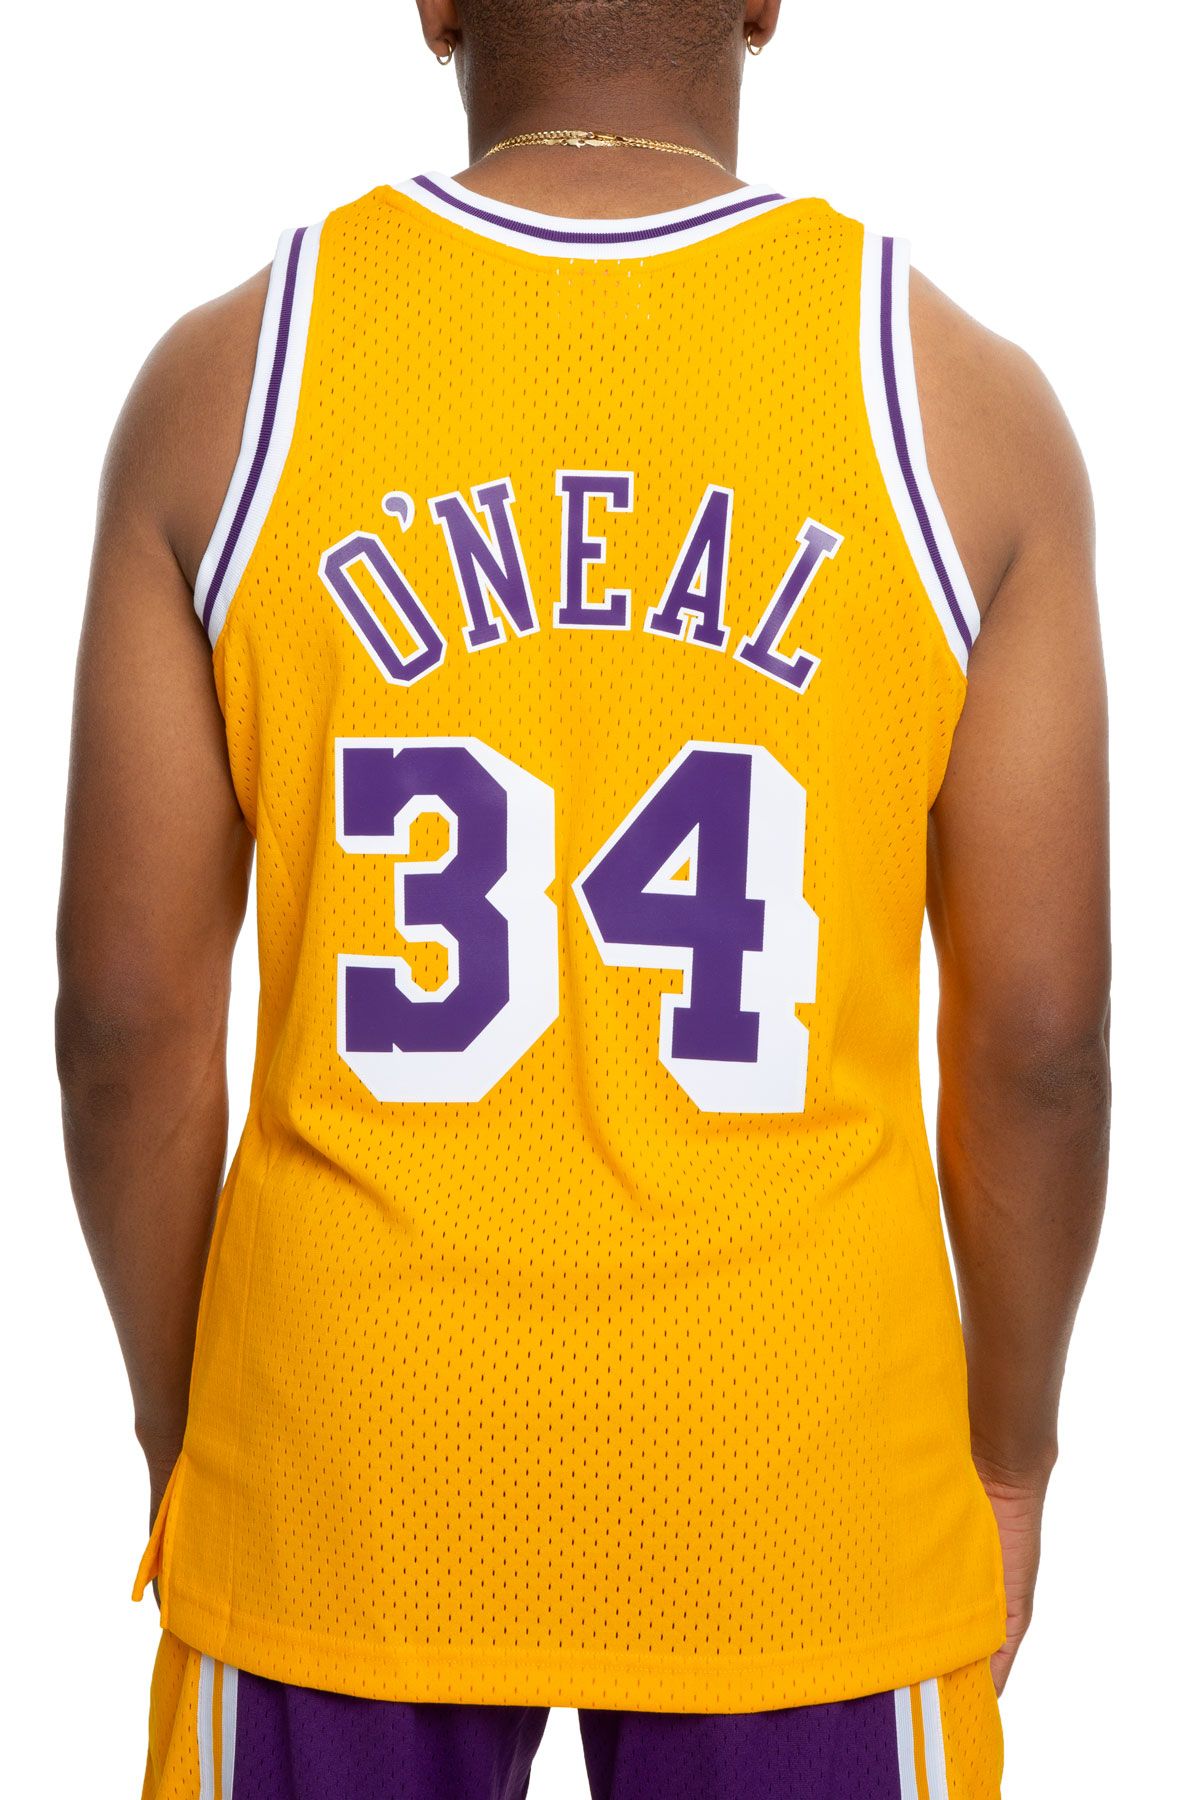 Mitchell & Ness NBA SHOOTING SHIRT LAKERS 1996 SHAQUILLE O'NEAL Yellow -  LIGHT GOLD